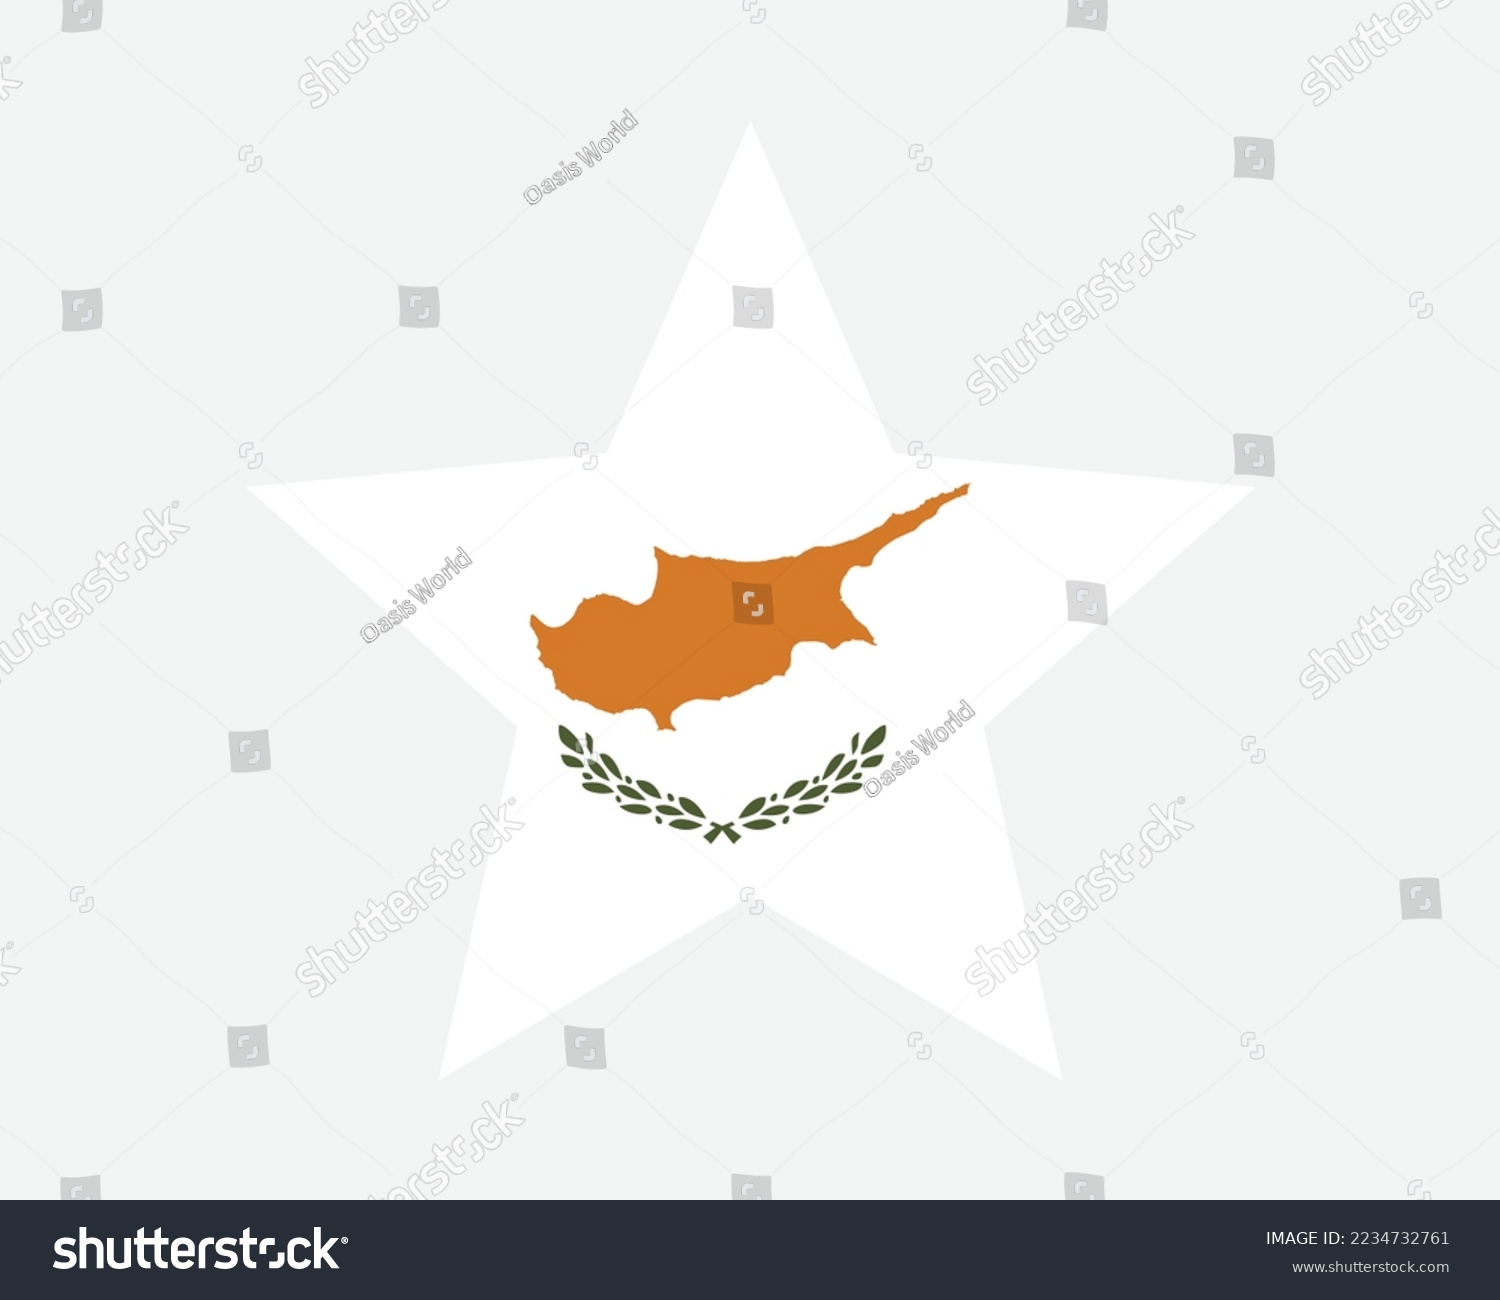 SVG of Cyprus Star Flag. Cypriot Star Shape Flag. Republic of Cyprus Country National Banner Icon Symbol Vector 2D Flat Artwork Graphic Illustration svg